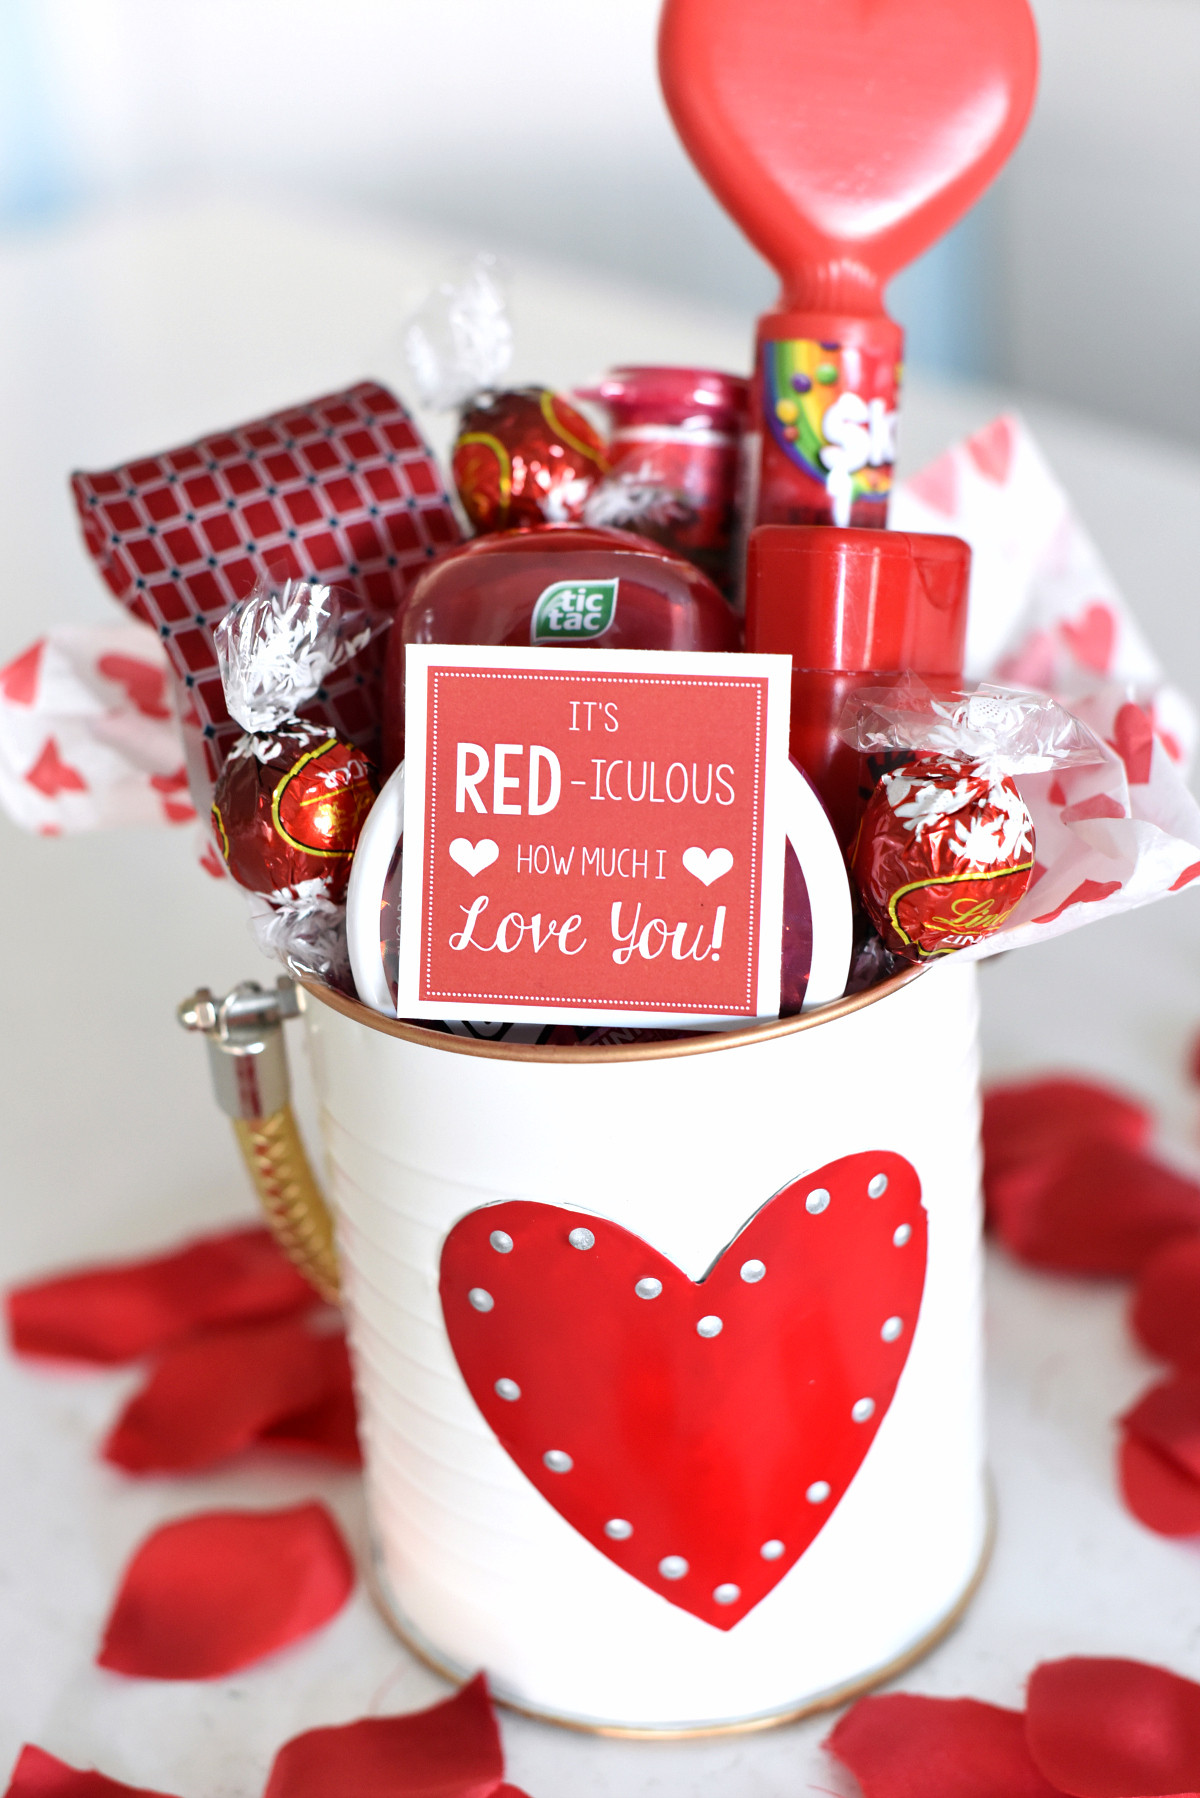 Couples Gift Ideas For Valentines
 Cute Valentine s Day Gift Idea RED iculous Basket